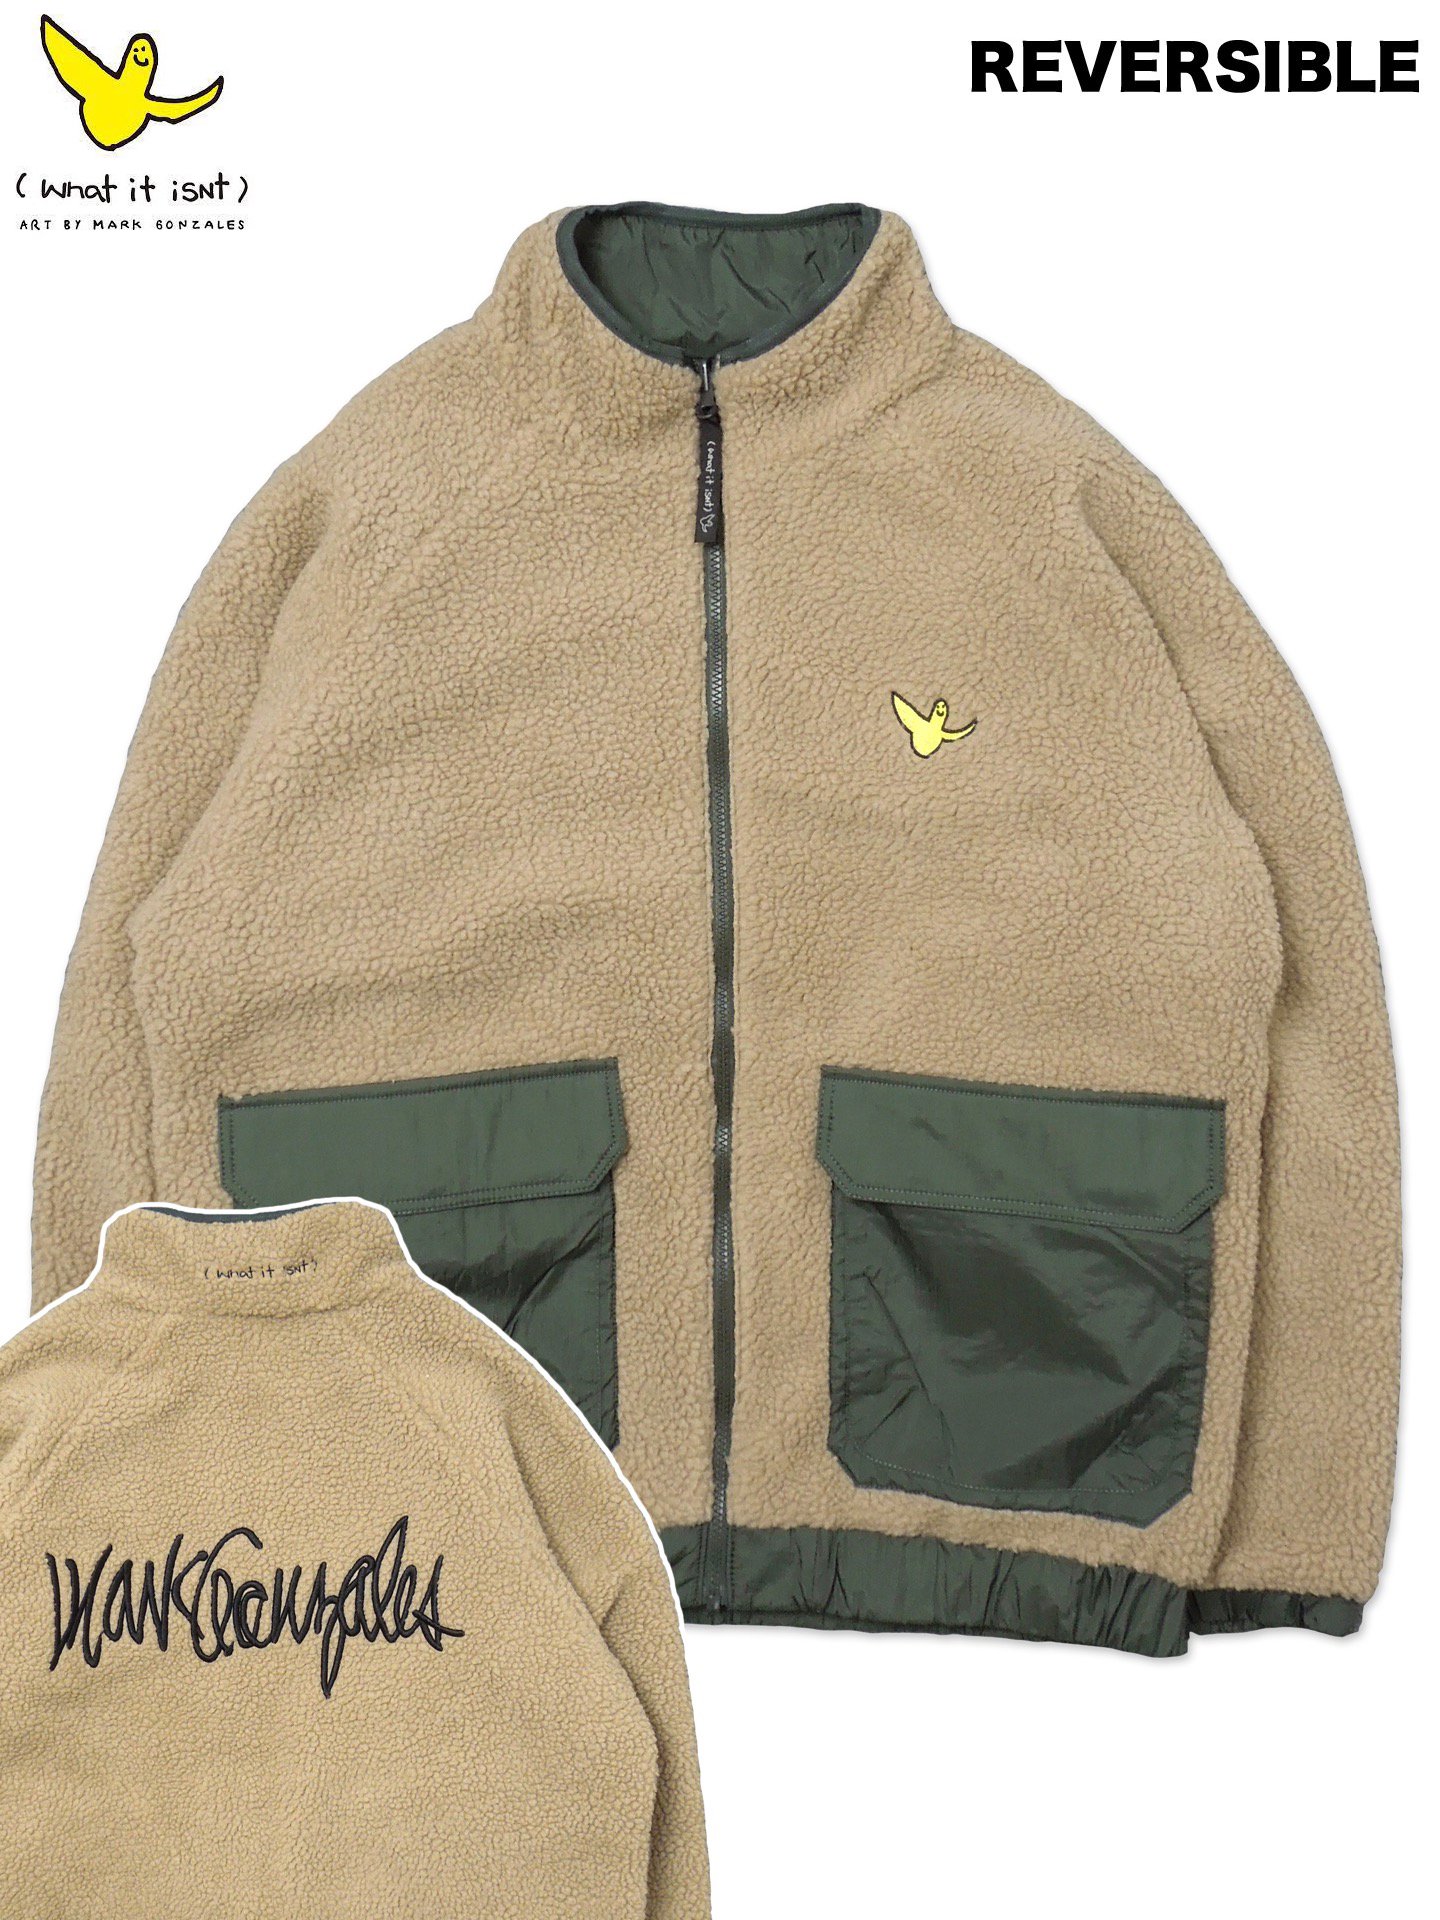 What it isNt ART BY MARK GONZALES] リバーシブルスタンドカラー